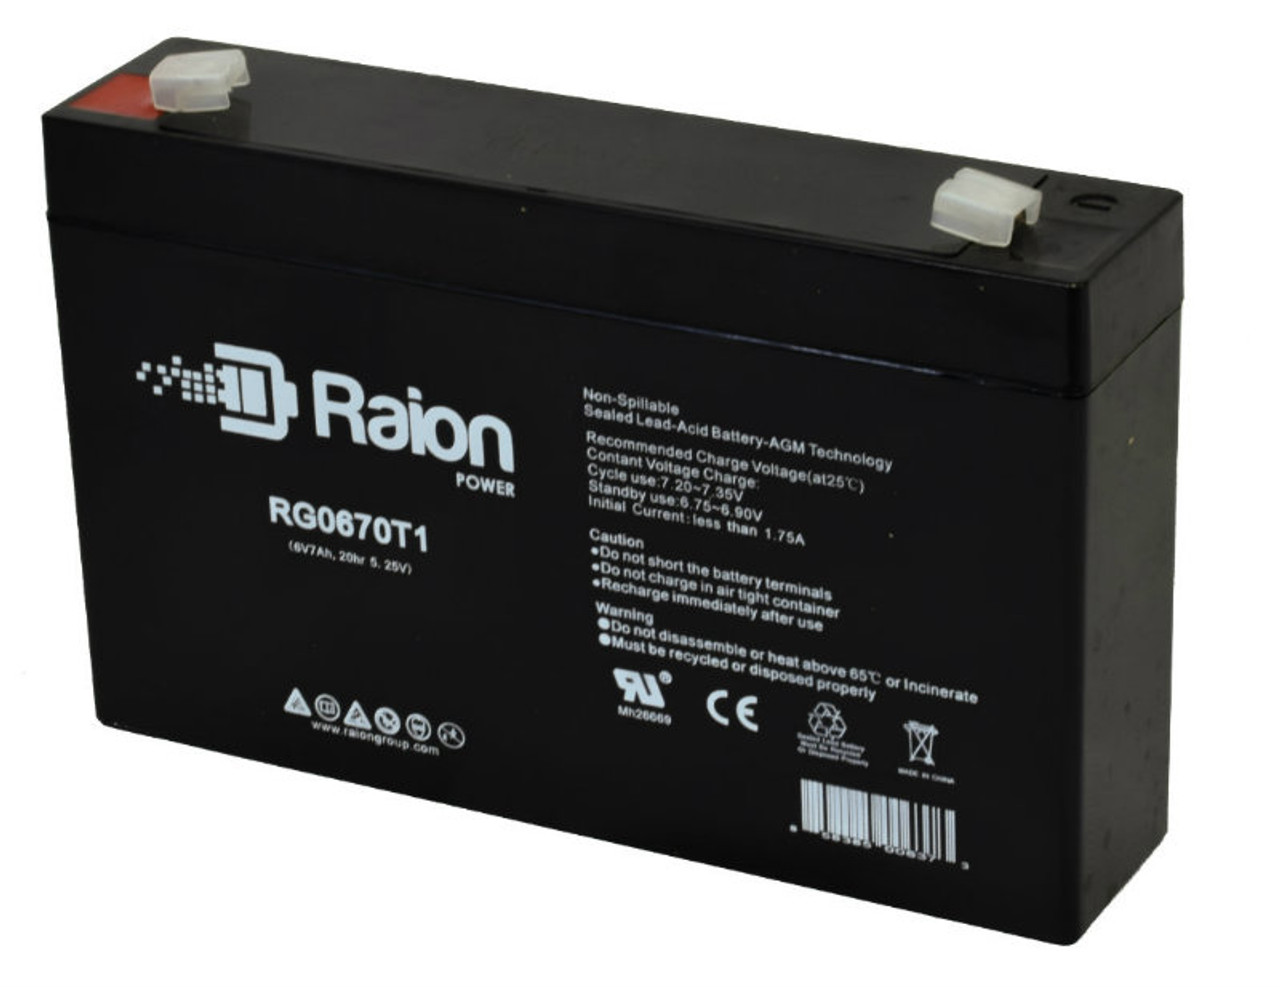 Raion Power RG0670T1 6V 7Ah Replacement Battery Cartridge for Ivy Biomedical System 700 ECG MONITORS Medical Equipment